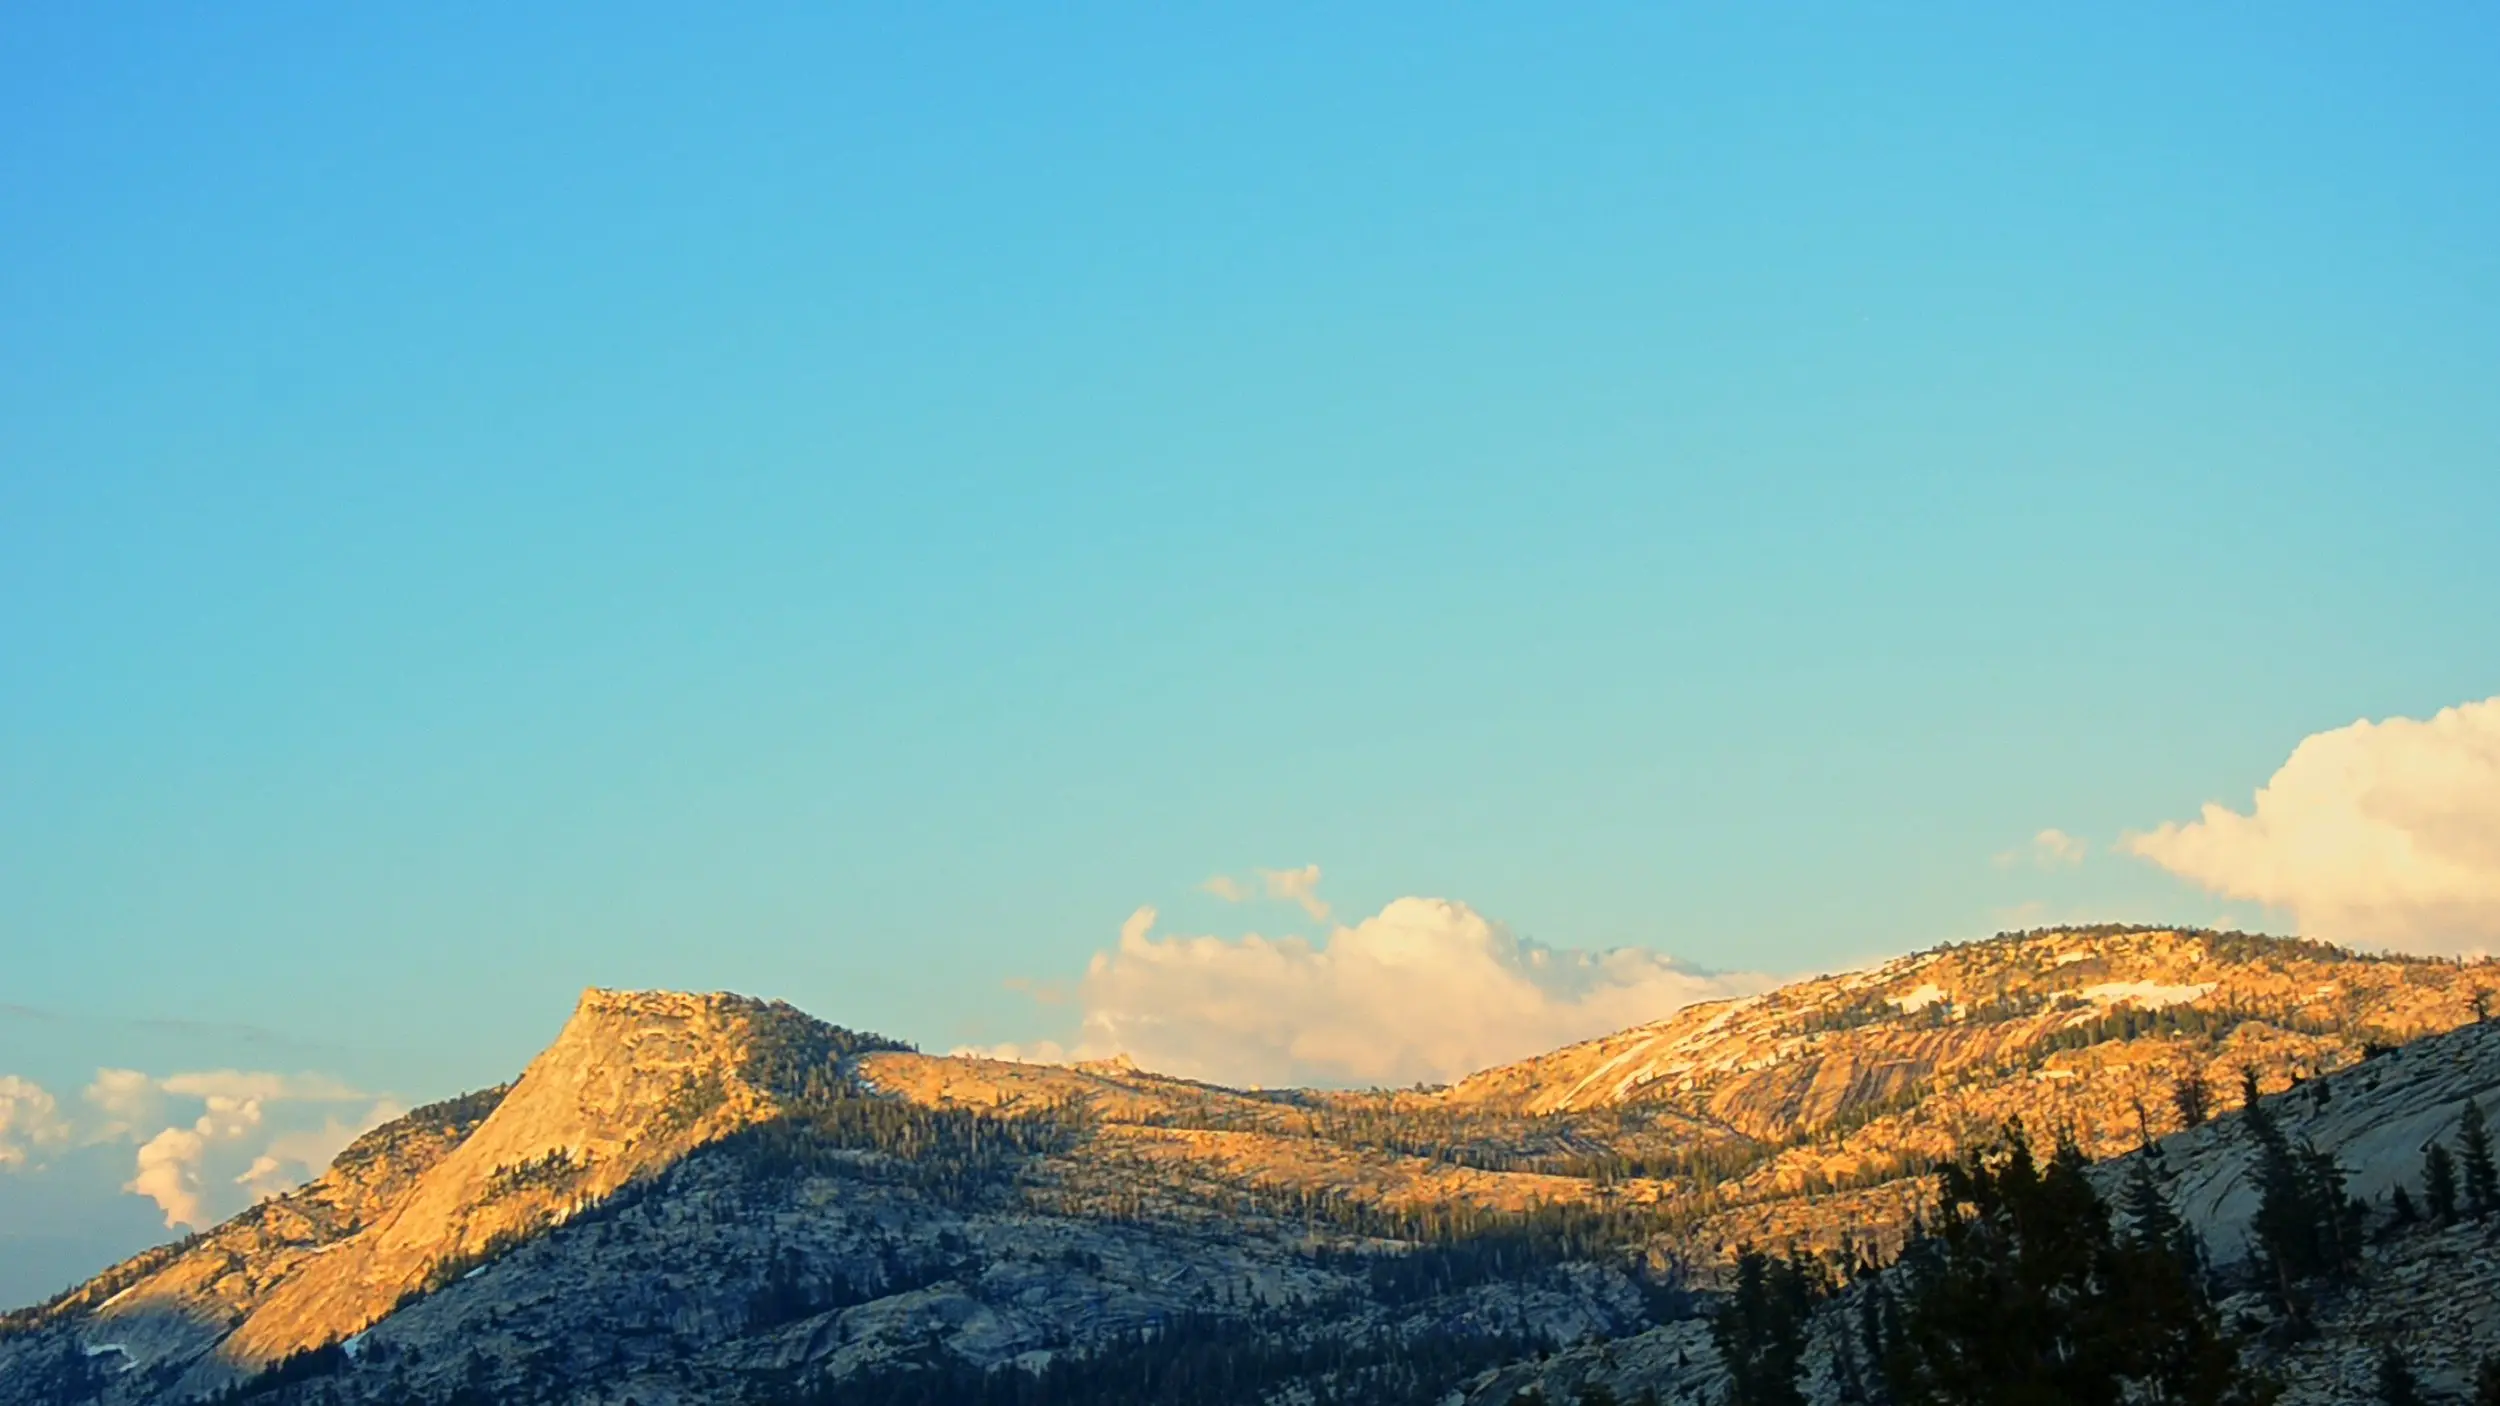 Golden hills under clear blue skies during sunset at Yosemite National Park.